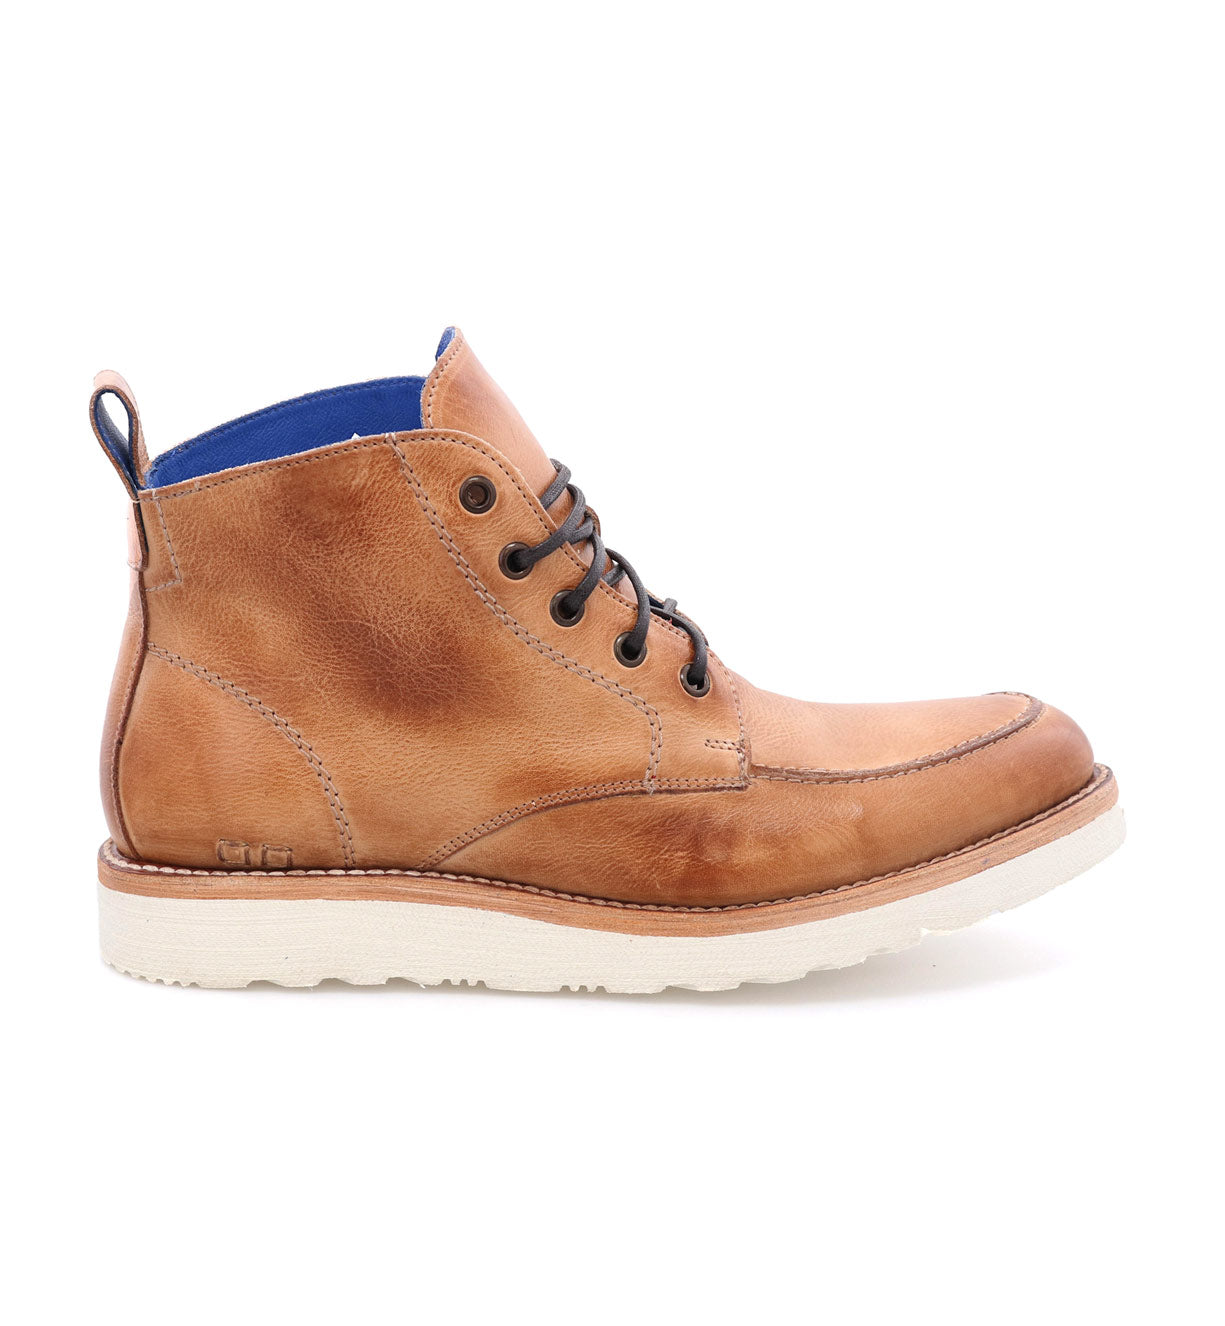 A single brown men's Bed Stu Lincoln leather boot with white soles and blue interior, isolated on a white background.